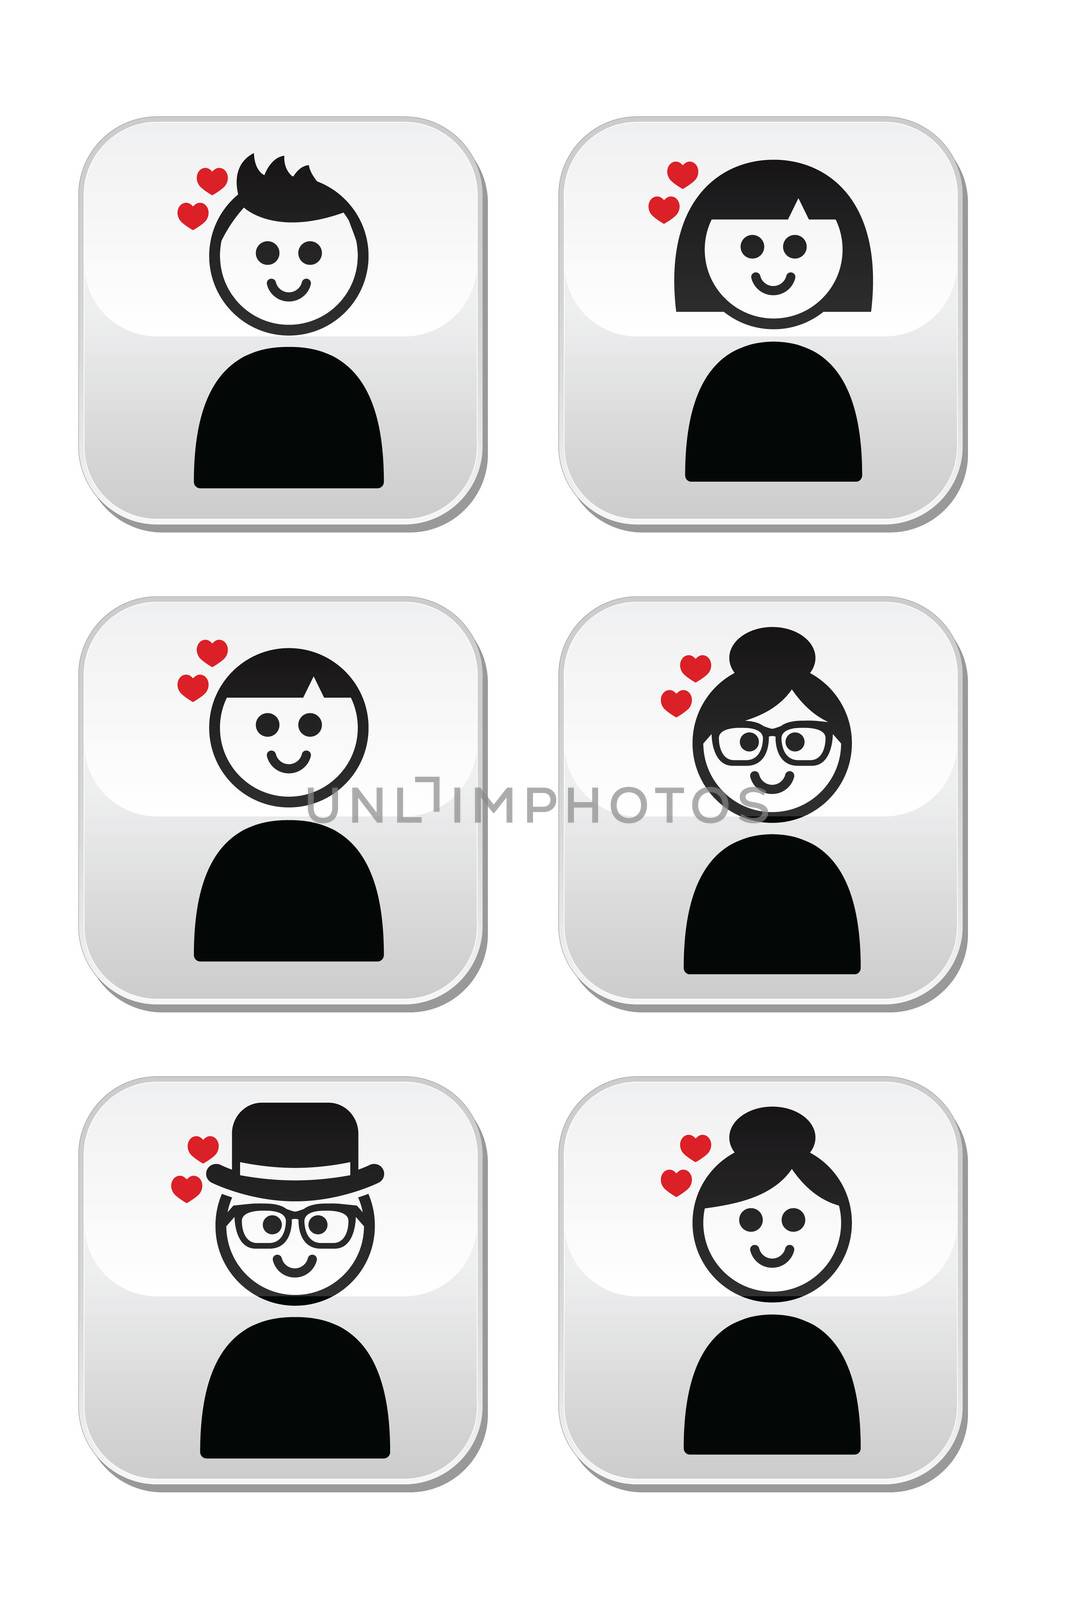 People with hearts, love, Valentine's Day buttons set by RedKoala